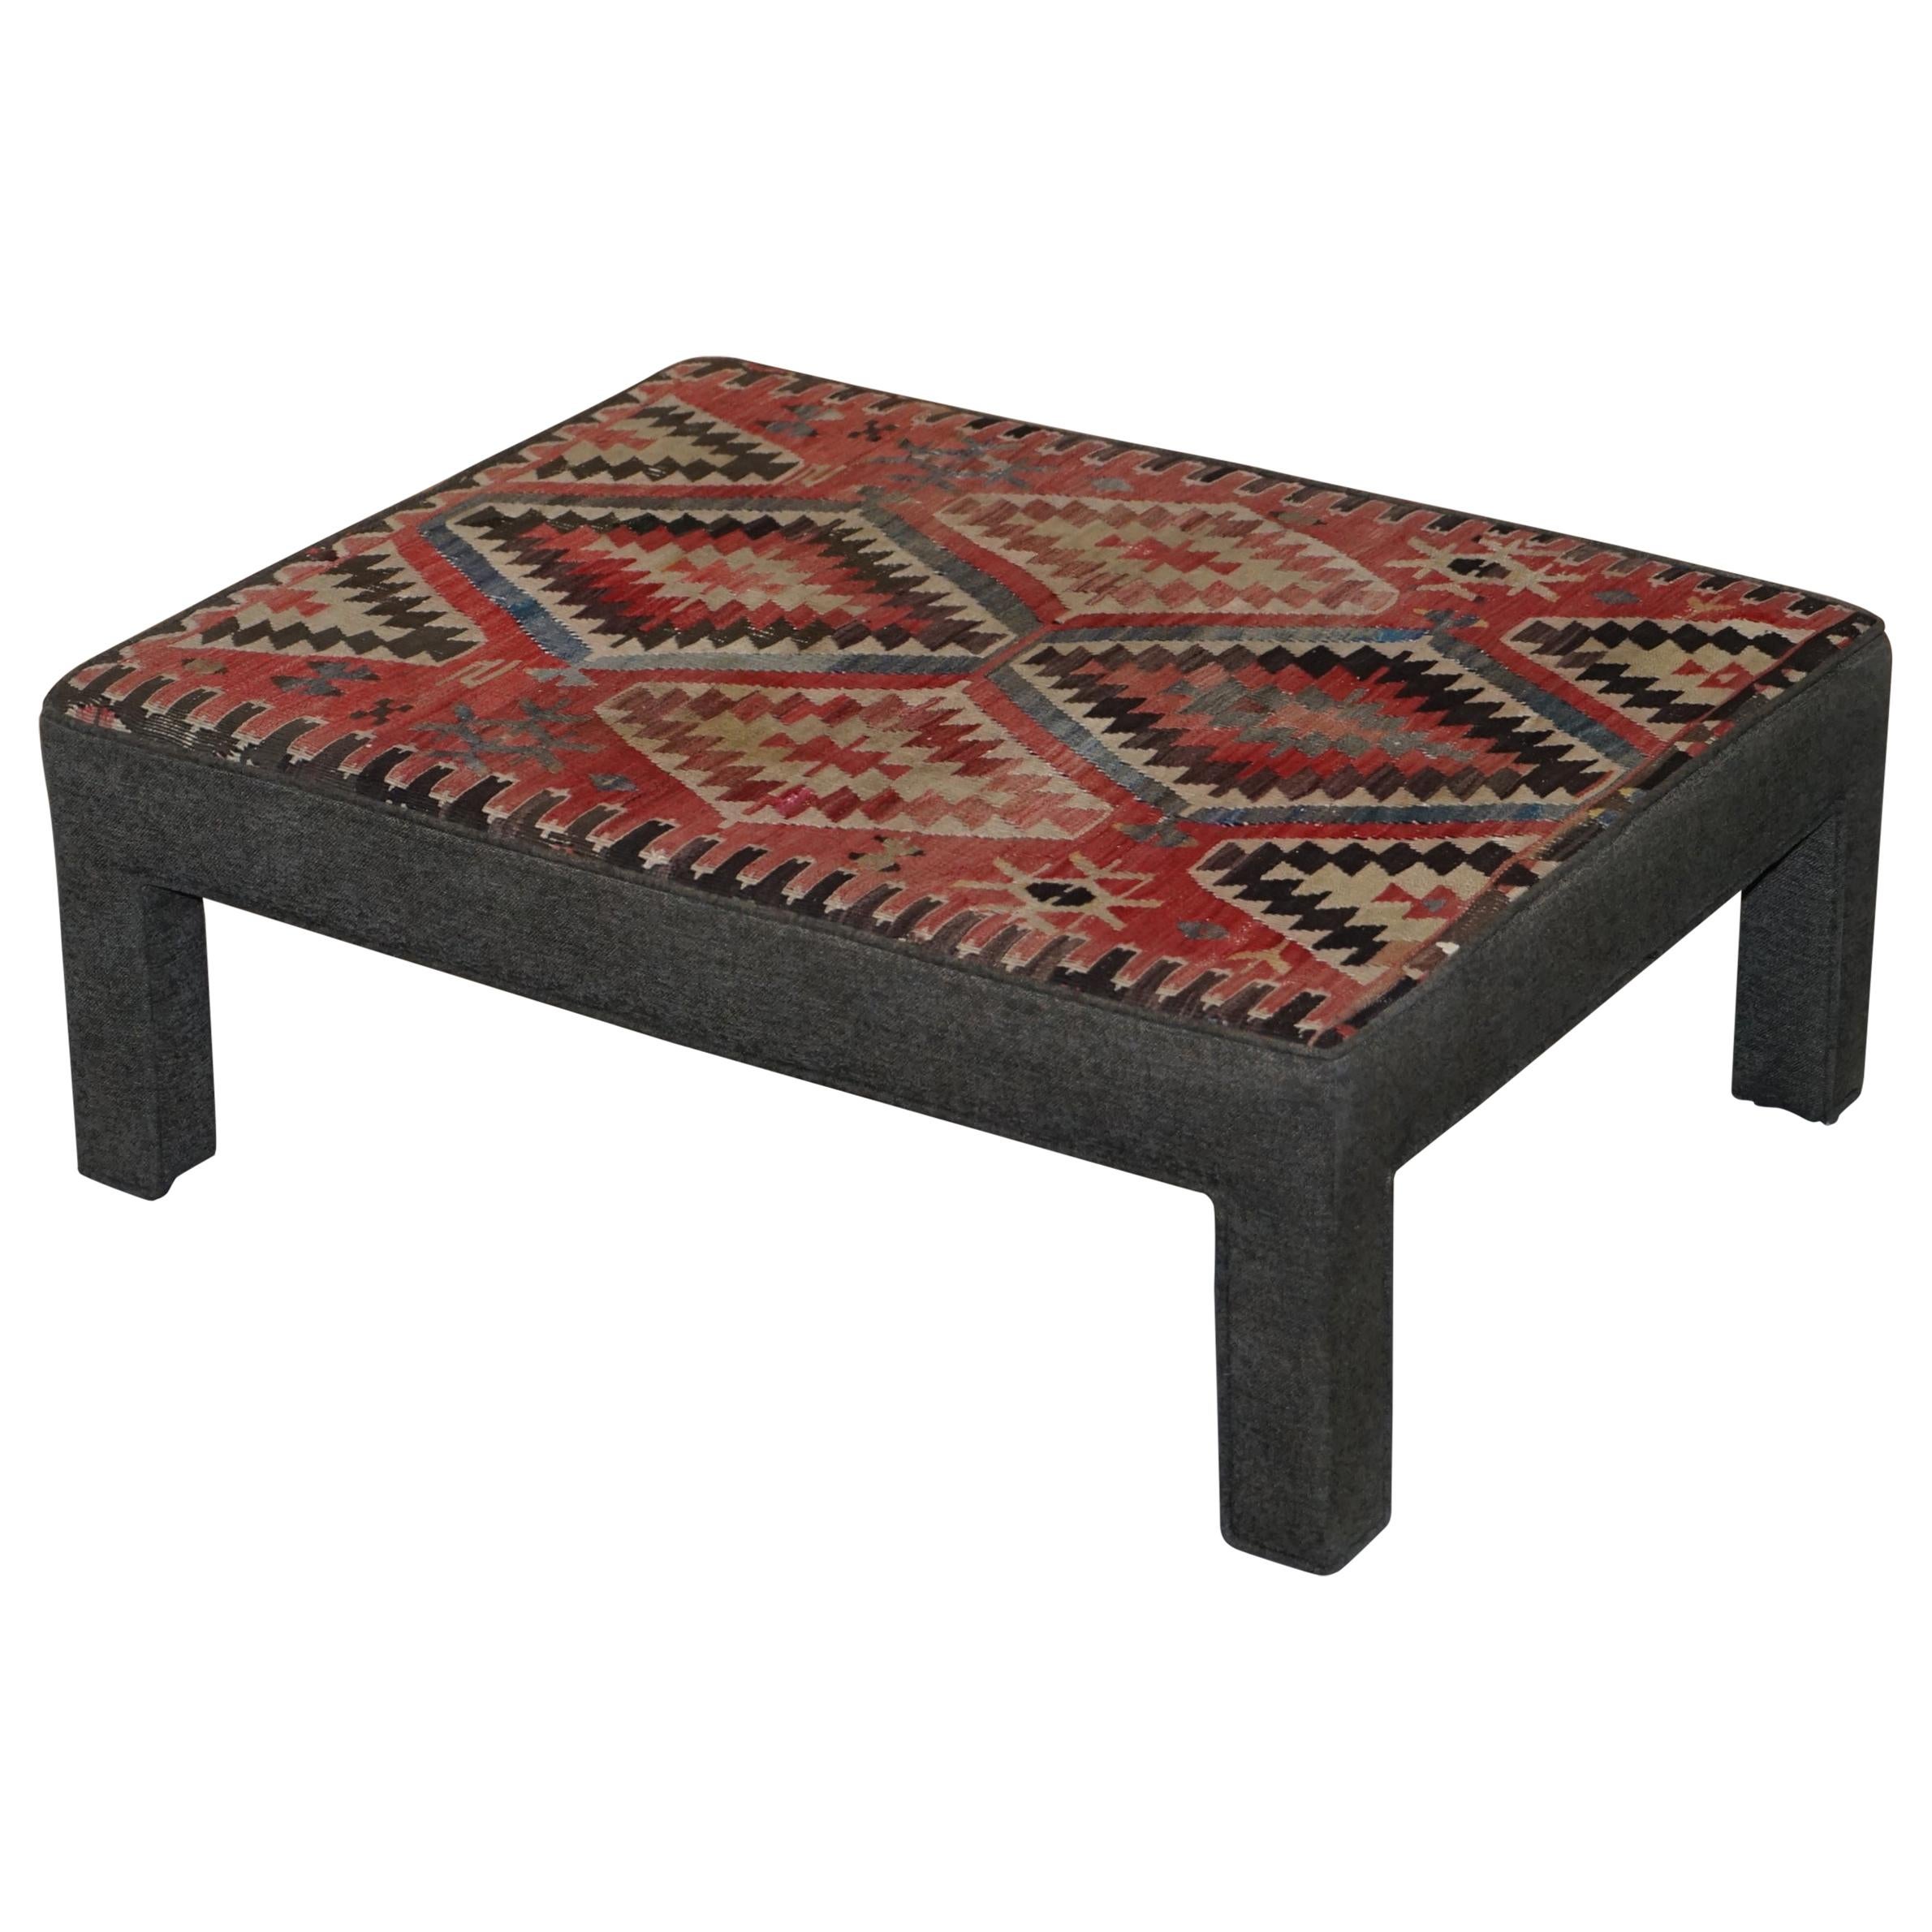 Vintage Kilim Upholstered Bench Ottoman Footstool Can Be Used as Coffee Table